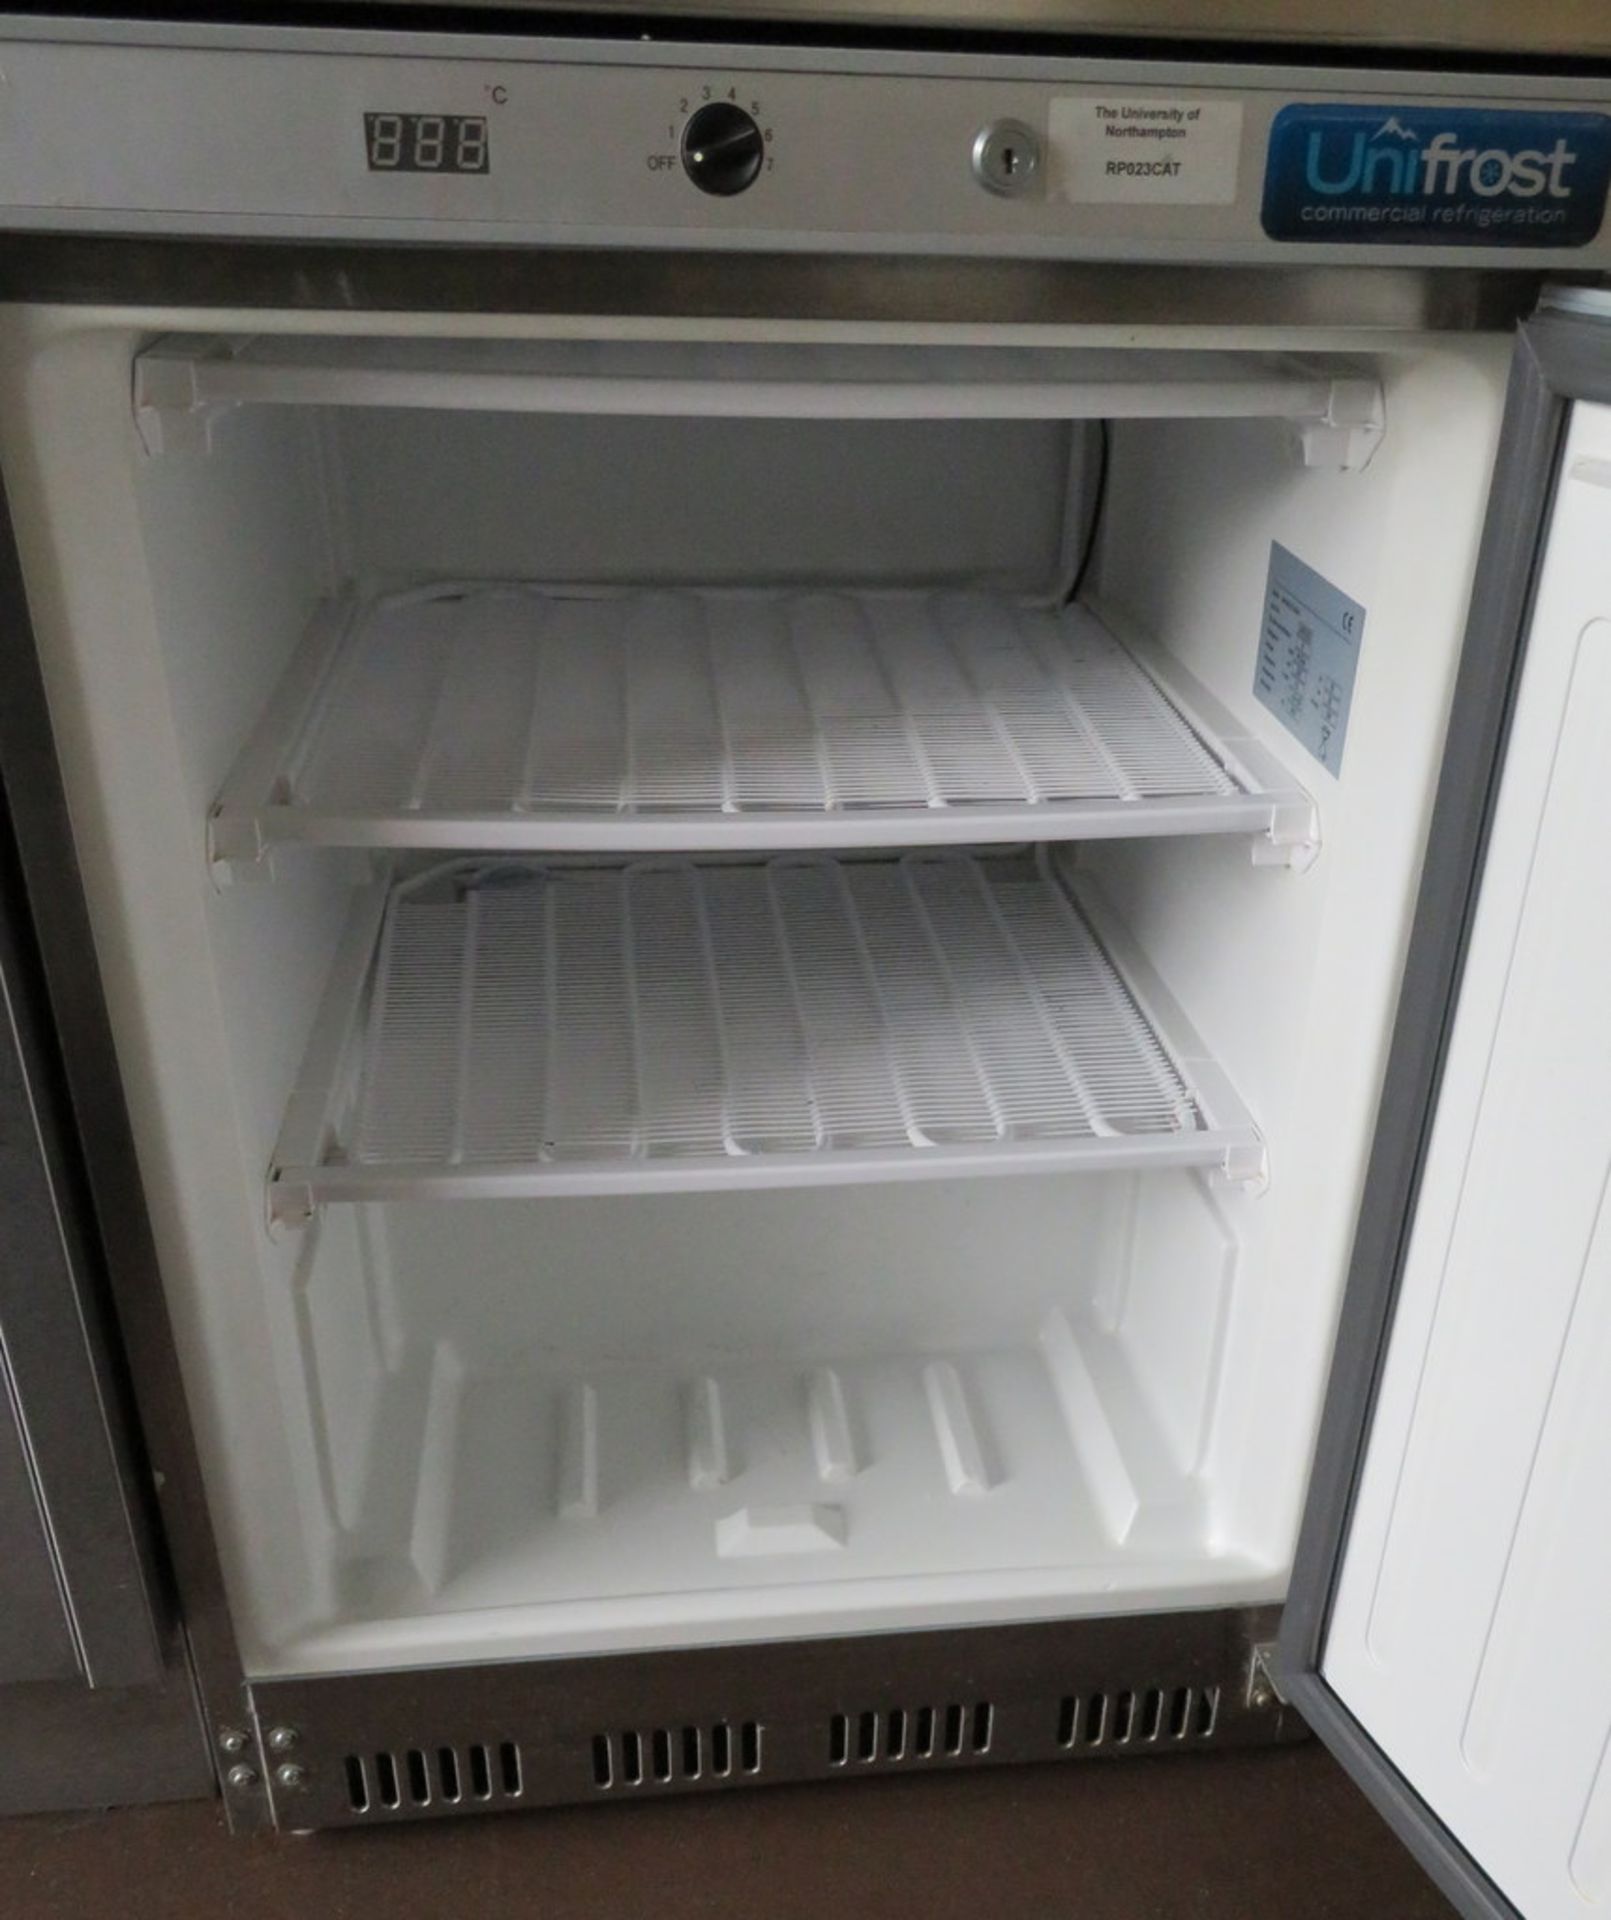 UNIFROST MODEL F200S STAINLESS STEEL UNDERCOUNTER FREEZER - Image 2 of 3